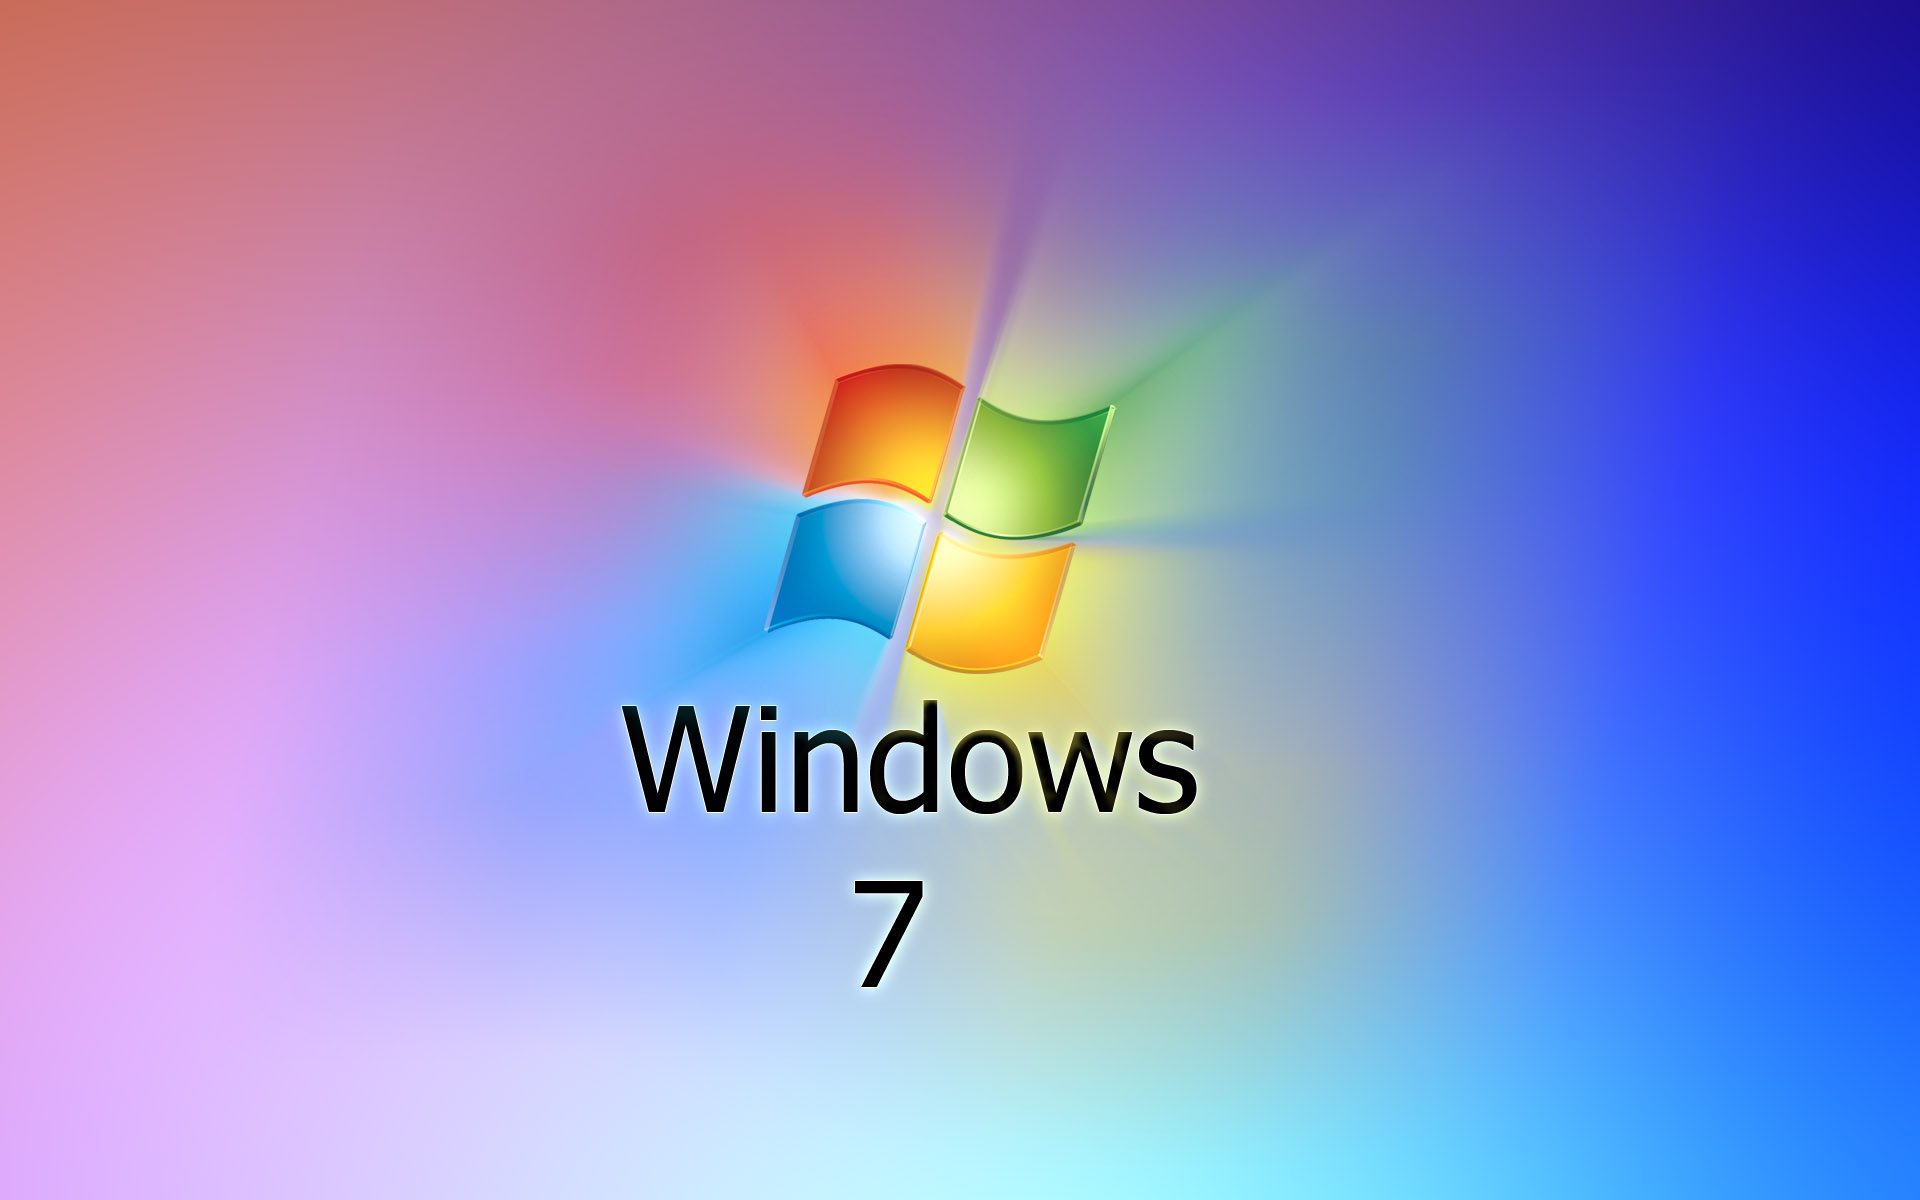 windows 7 pictures windows 7 hd wallpapers windows 7 hd